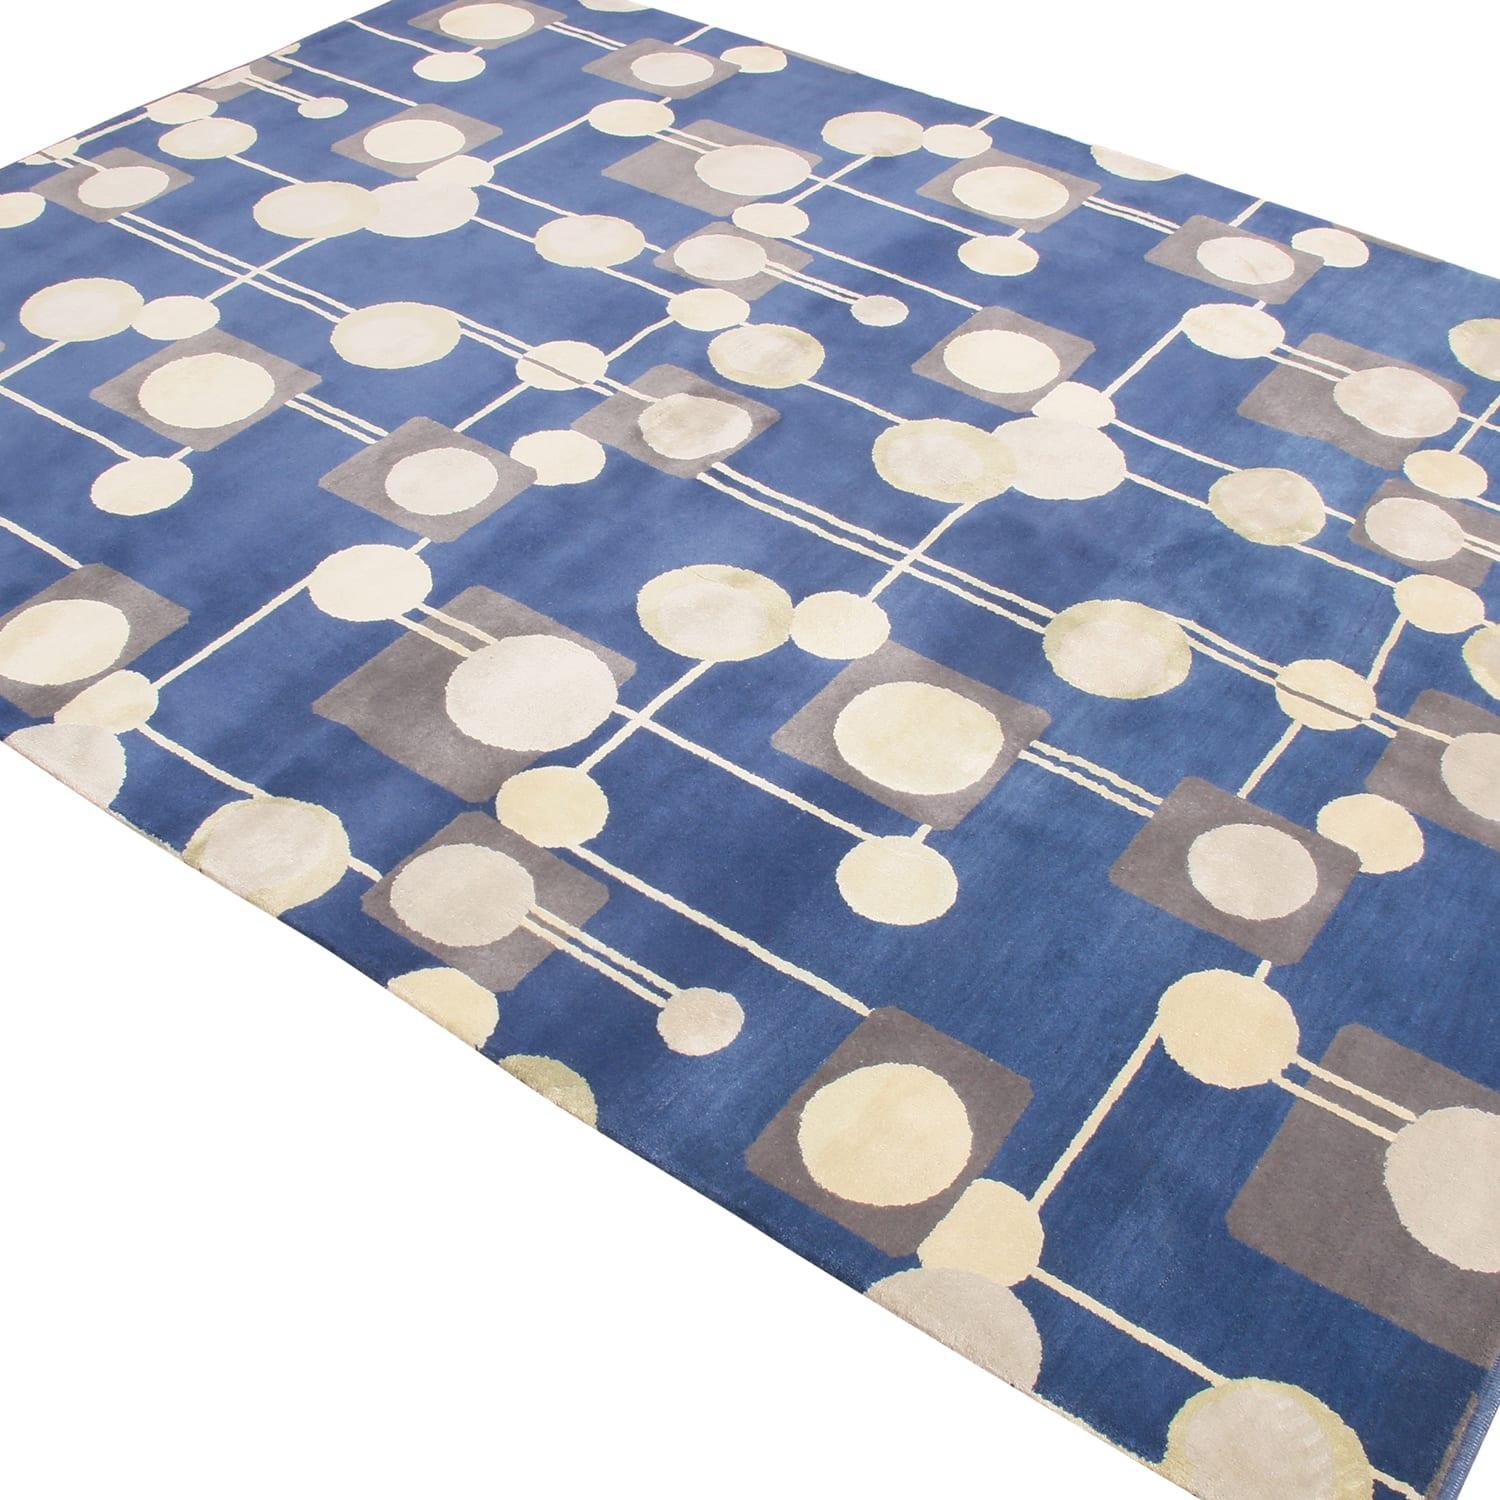 Blue Circle Mid-Century Modern Rug 6 Ft 3 in x 8 Ft 2 in In Good Condition For Sale In New York, NY